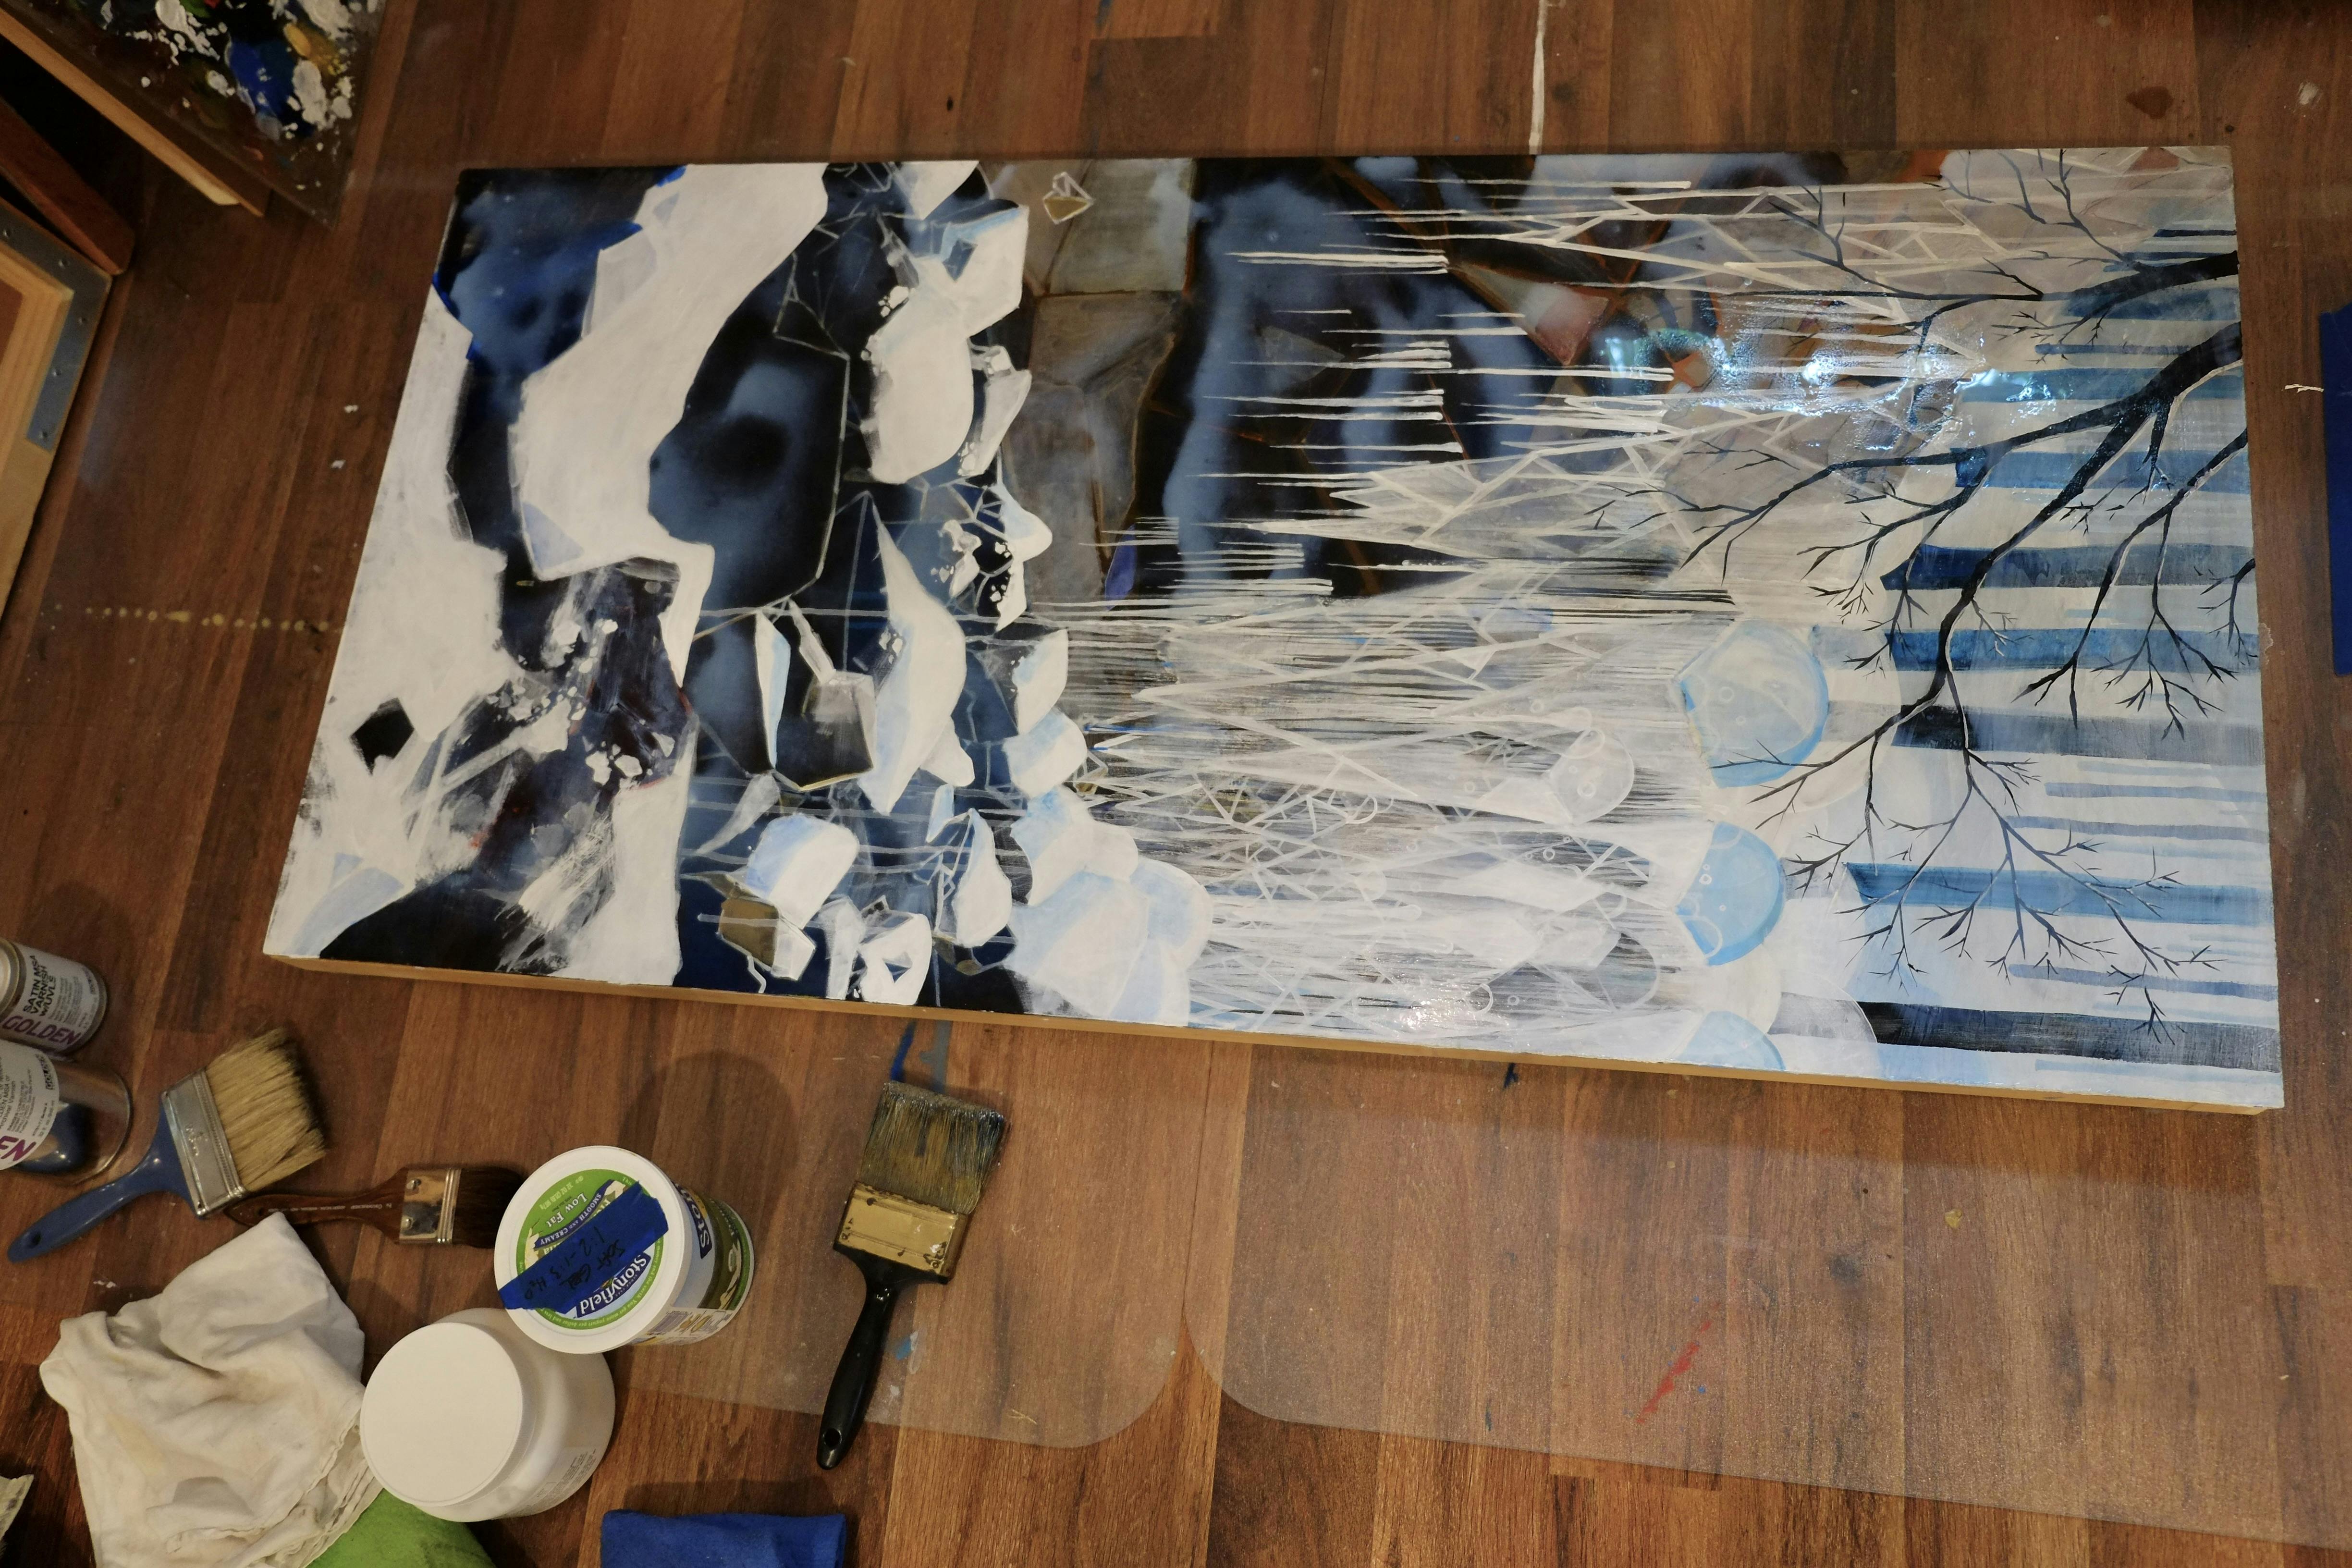 An overhead perspective of one of the panels of my Frozen Waterfall triptych. A wet coat of varnish has just been applied and is visible as cloudy puddles on the painting's surface. Brushes and yogurt tubs (containing varnish and solvent) are visible on the floor nearby.